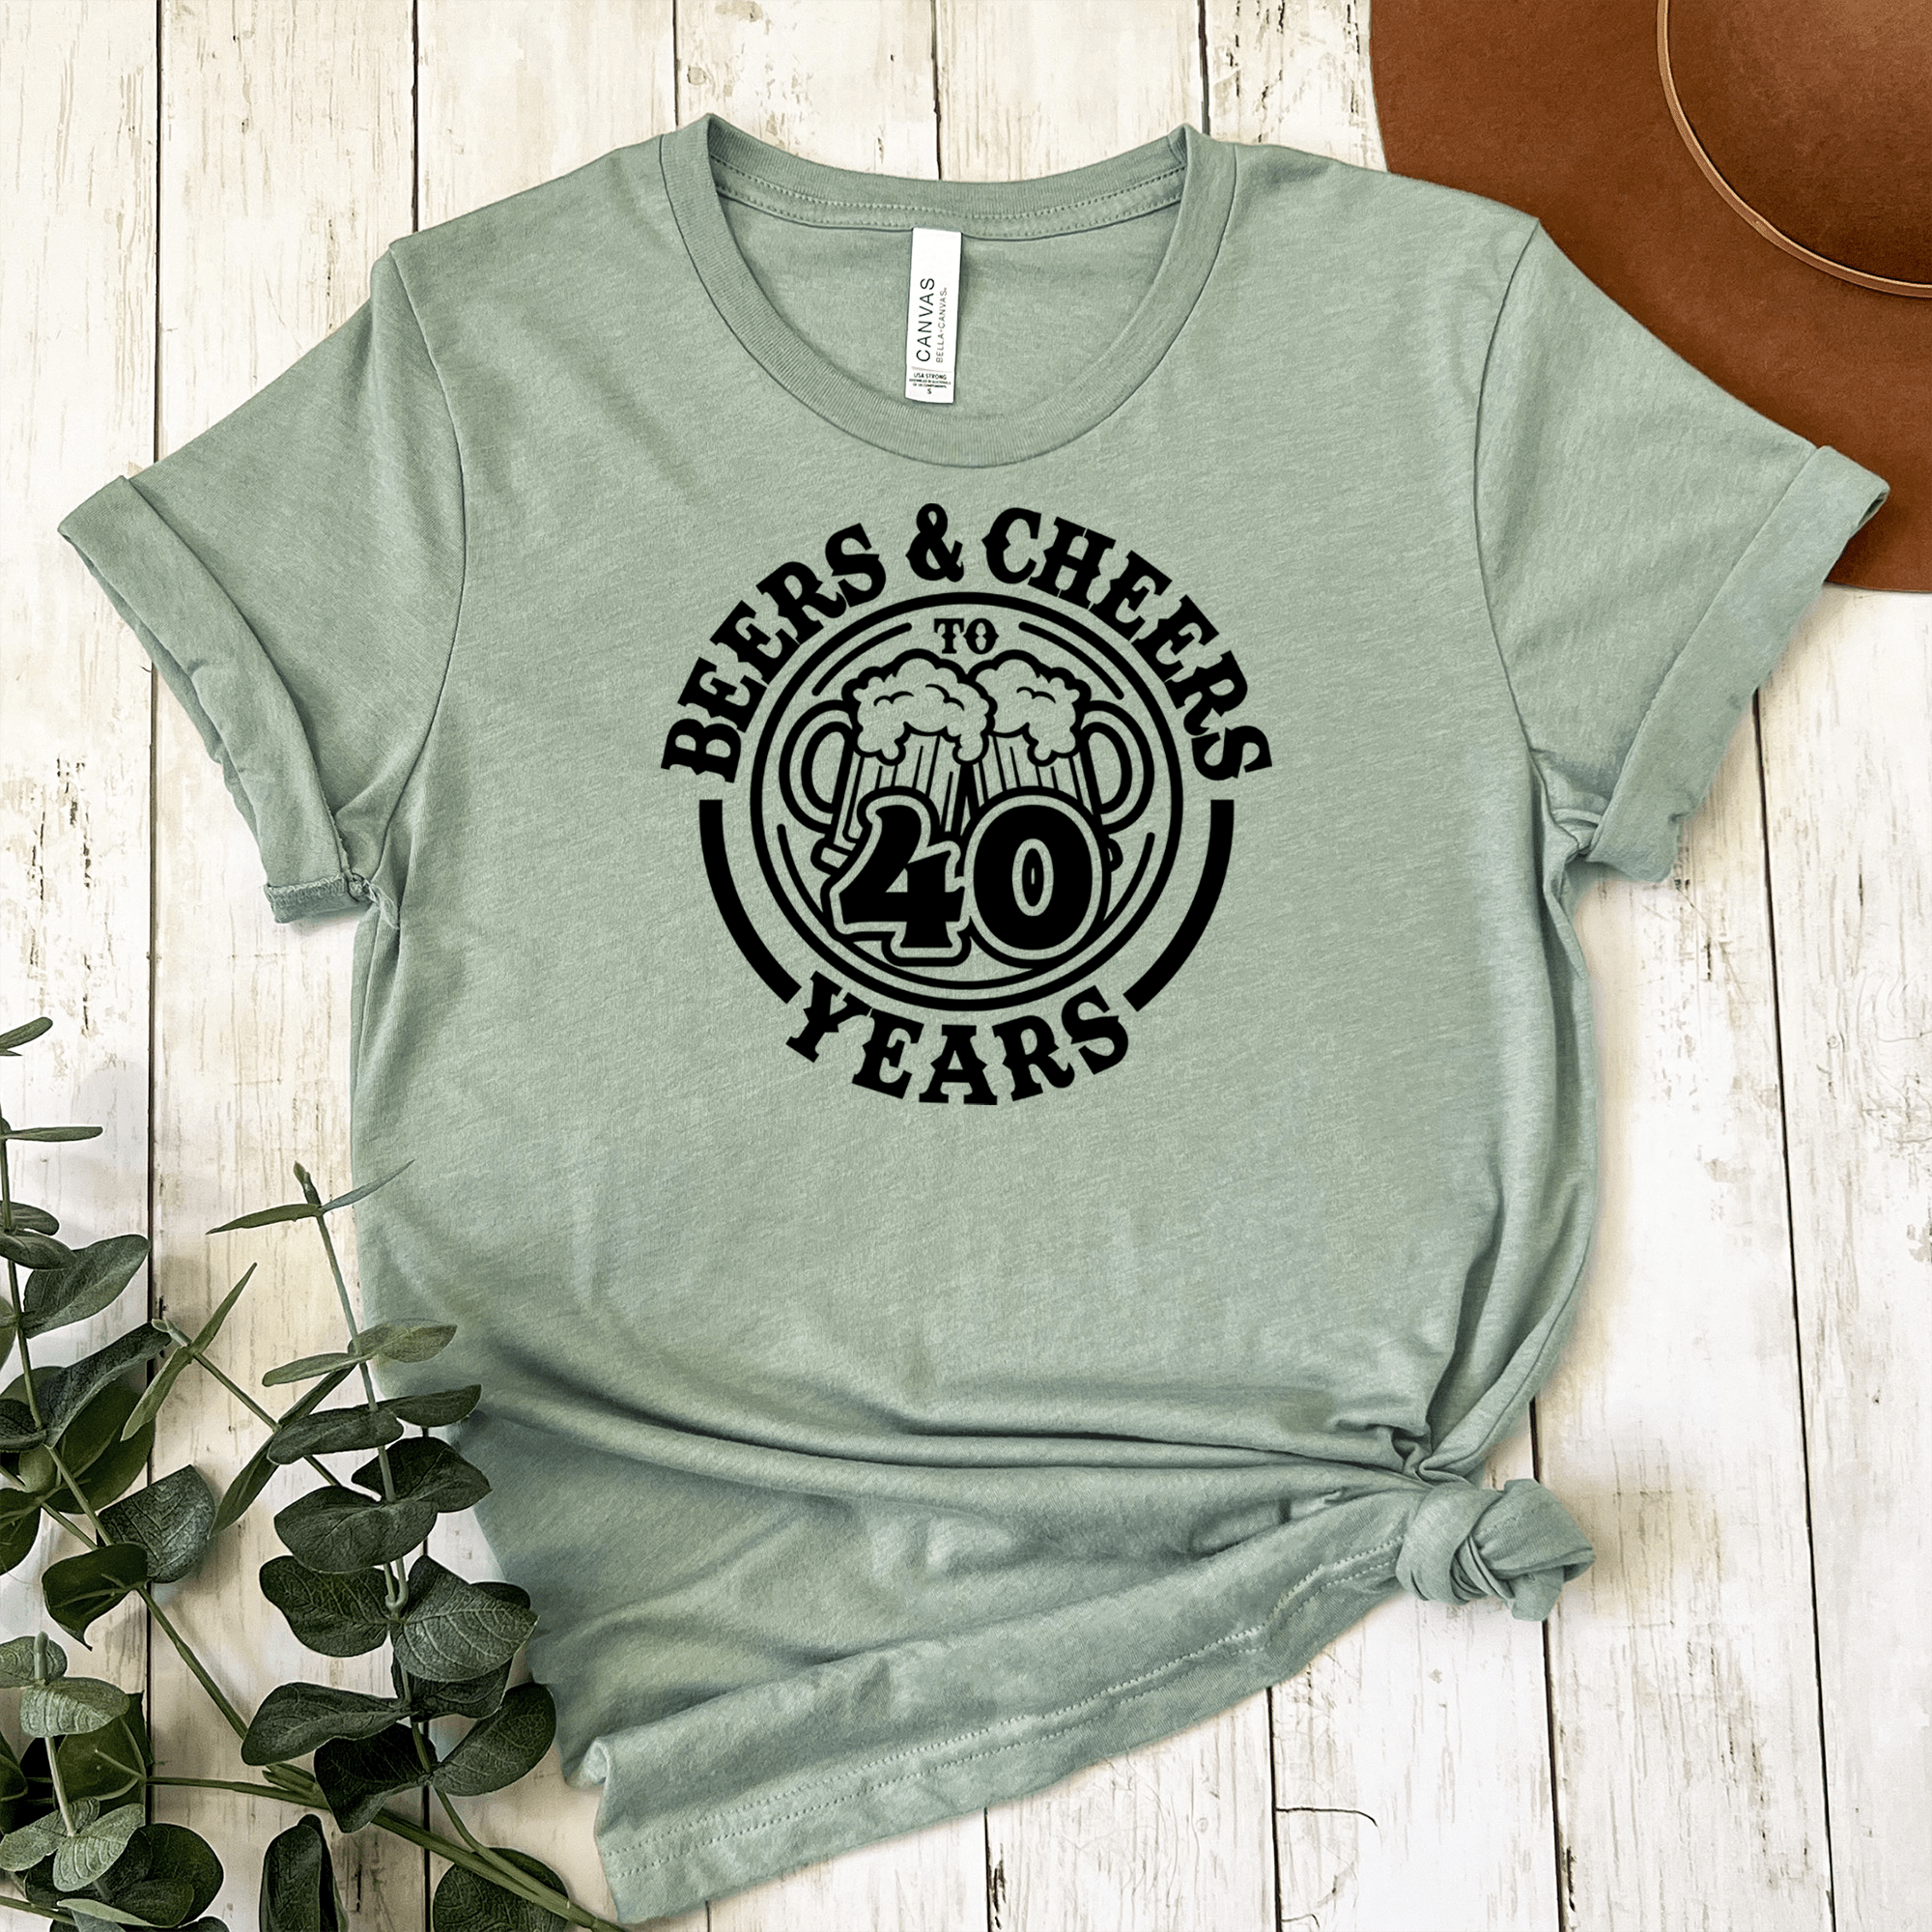 Womens Light Green T Shirt with Cheers-And-Beers-40 design